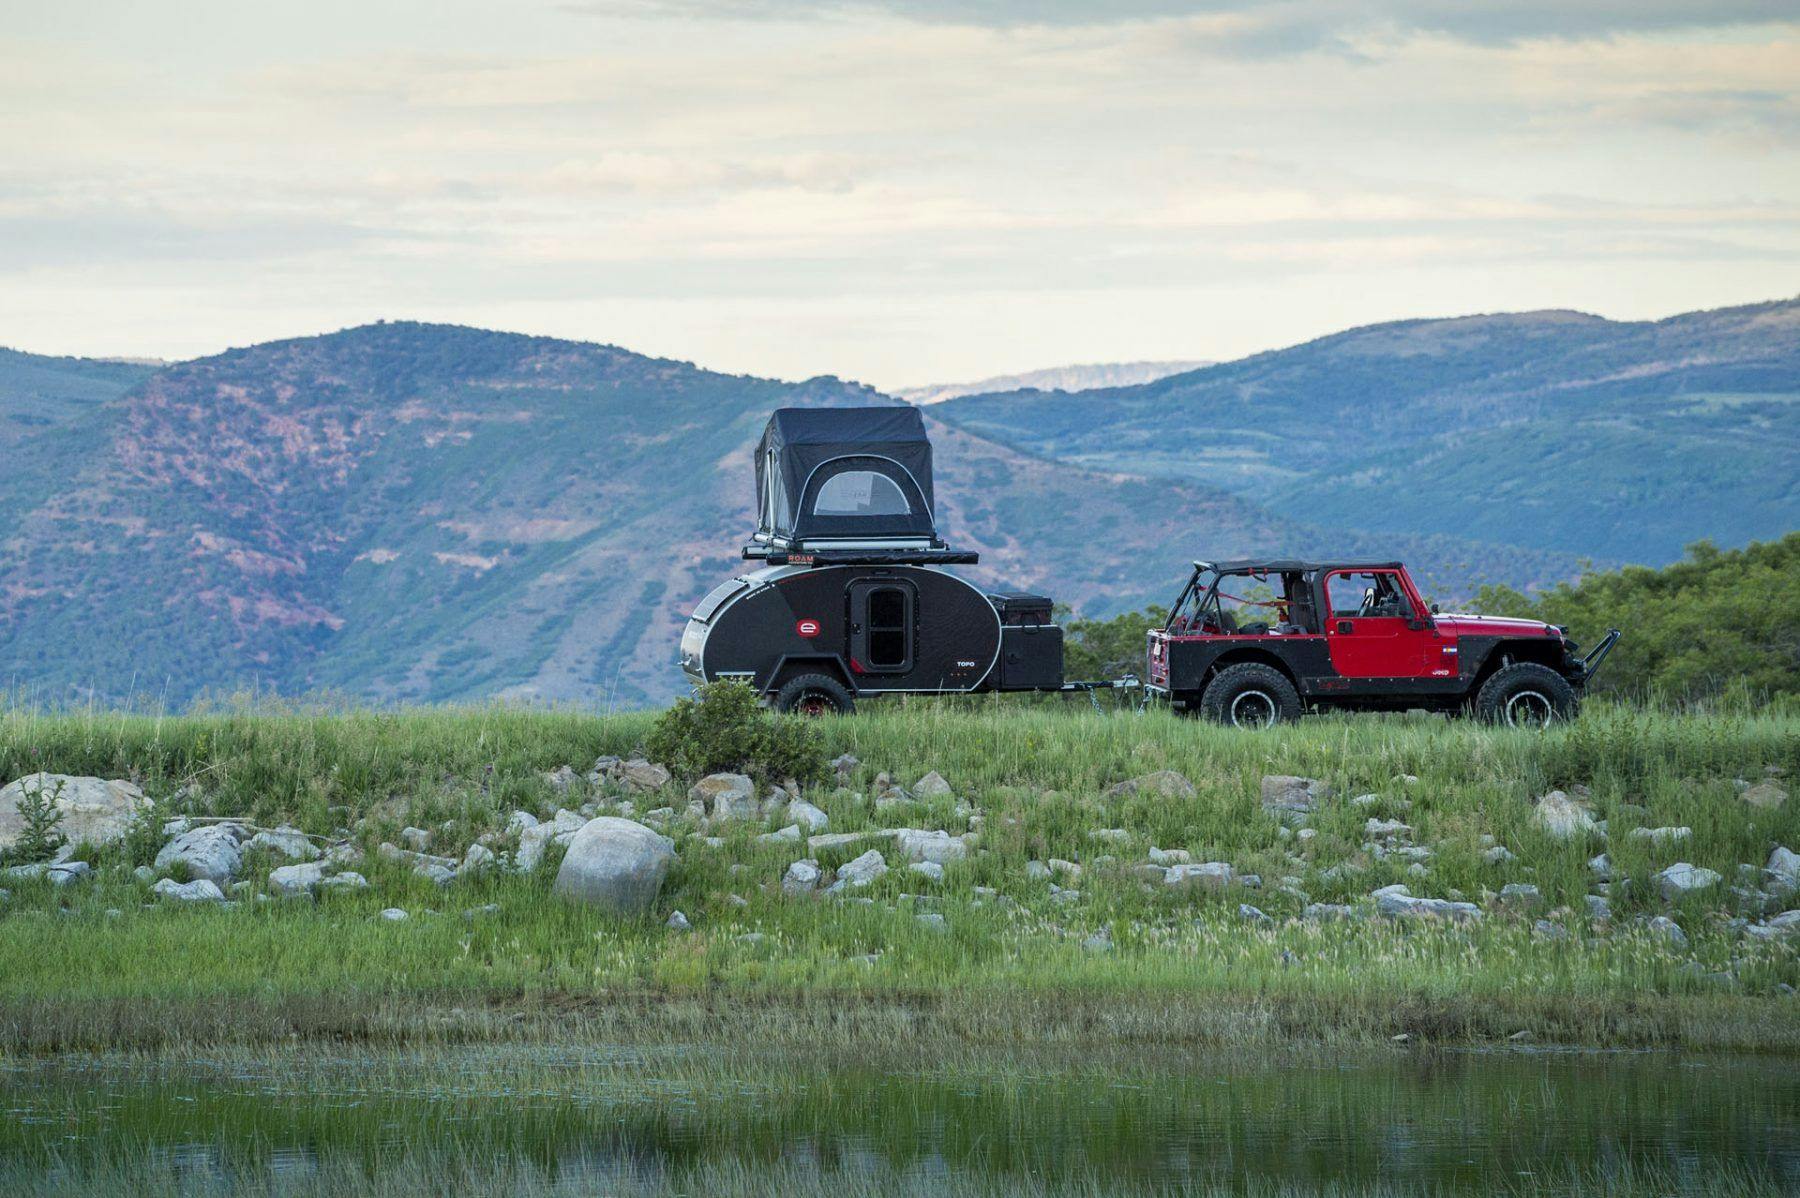 A teardrop trailer with a rooftop tent mounted on top being towed by a red JEEP.